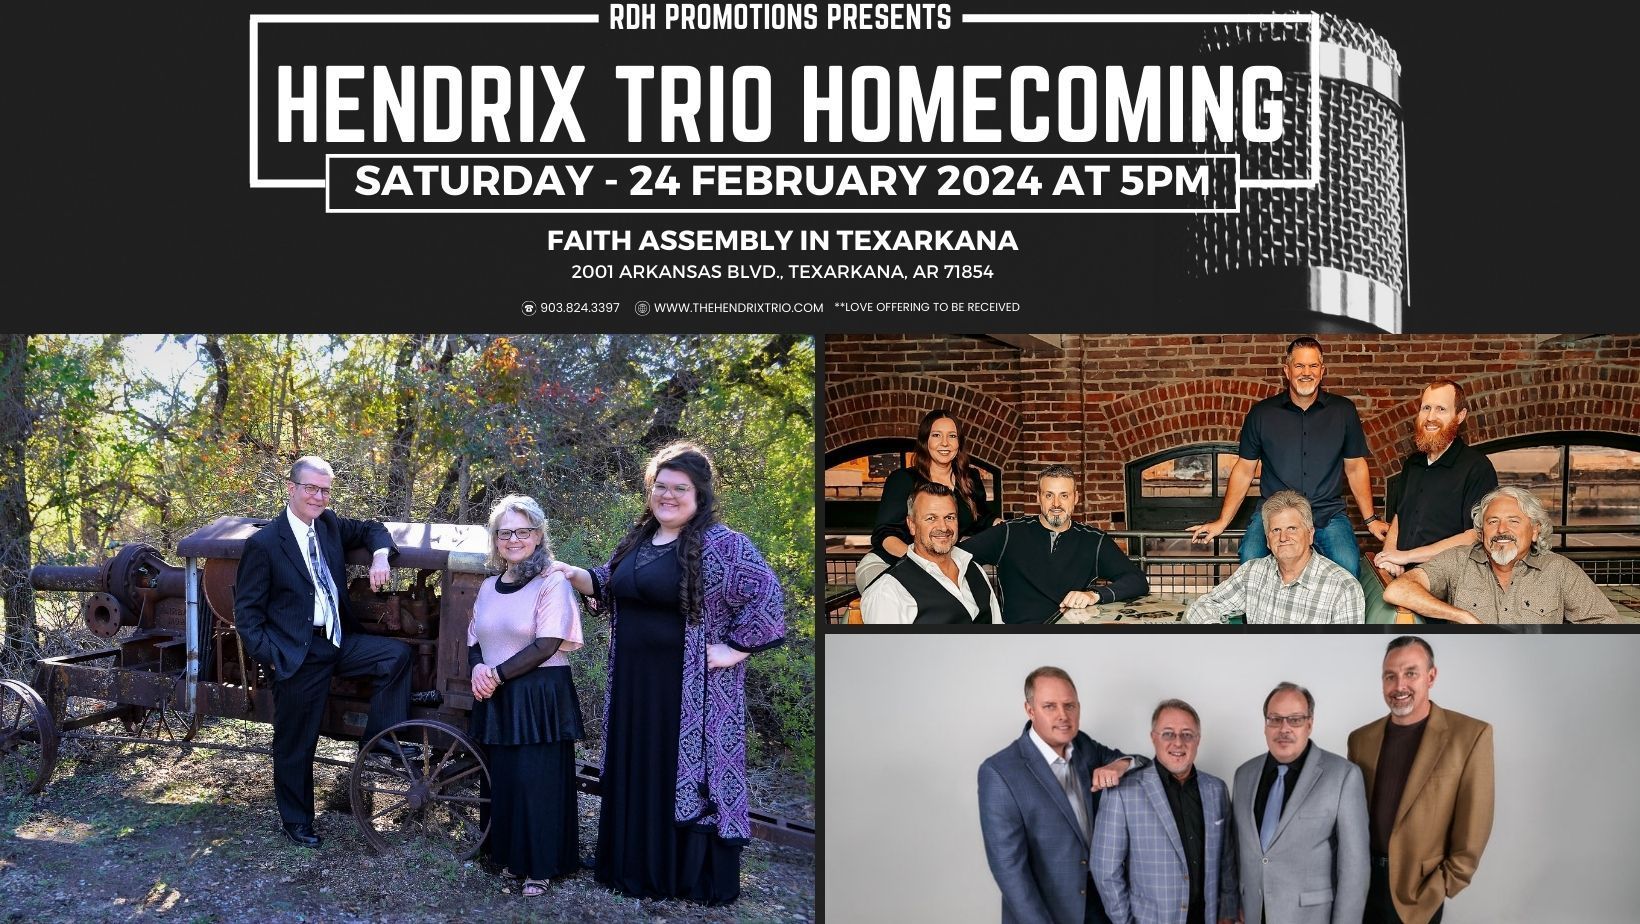 a group of people standing next to each other on a poster for hendrix trio homecoming .